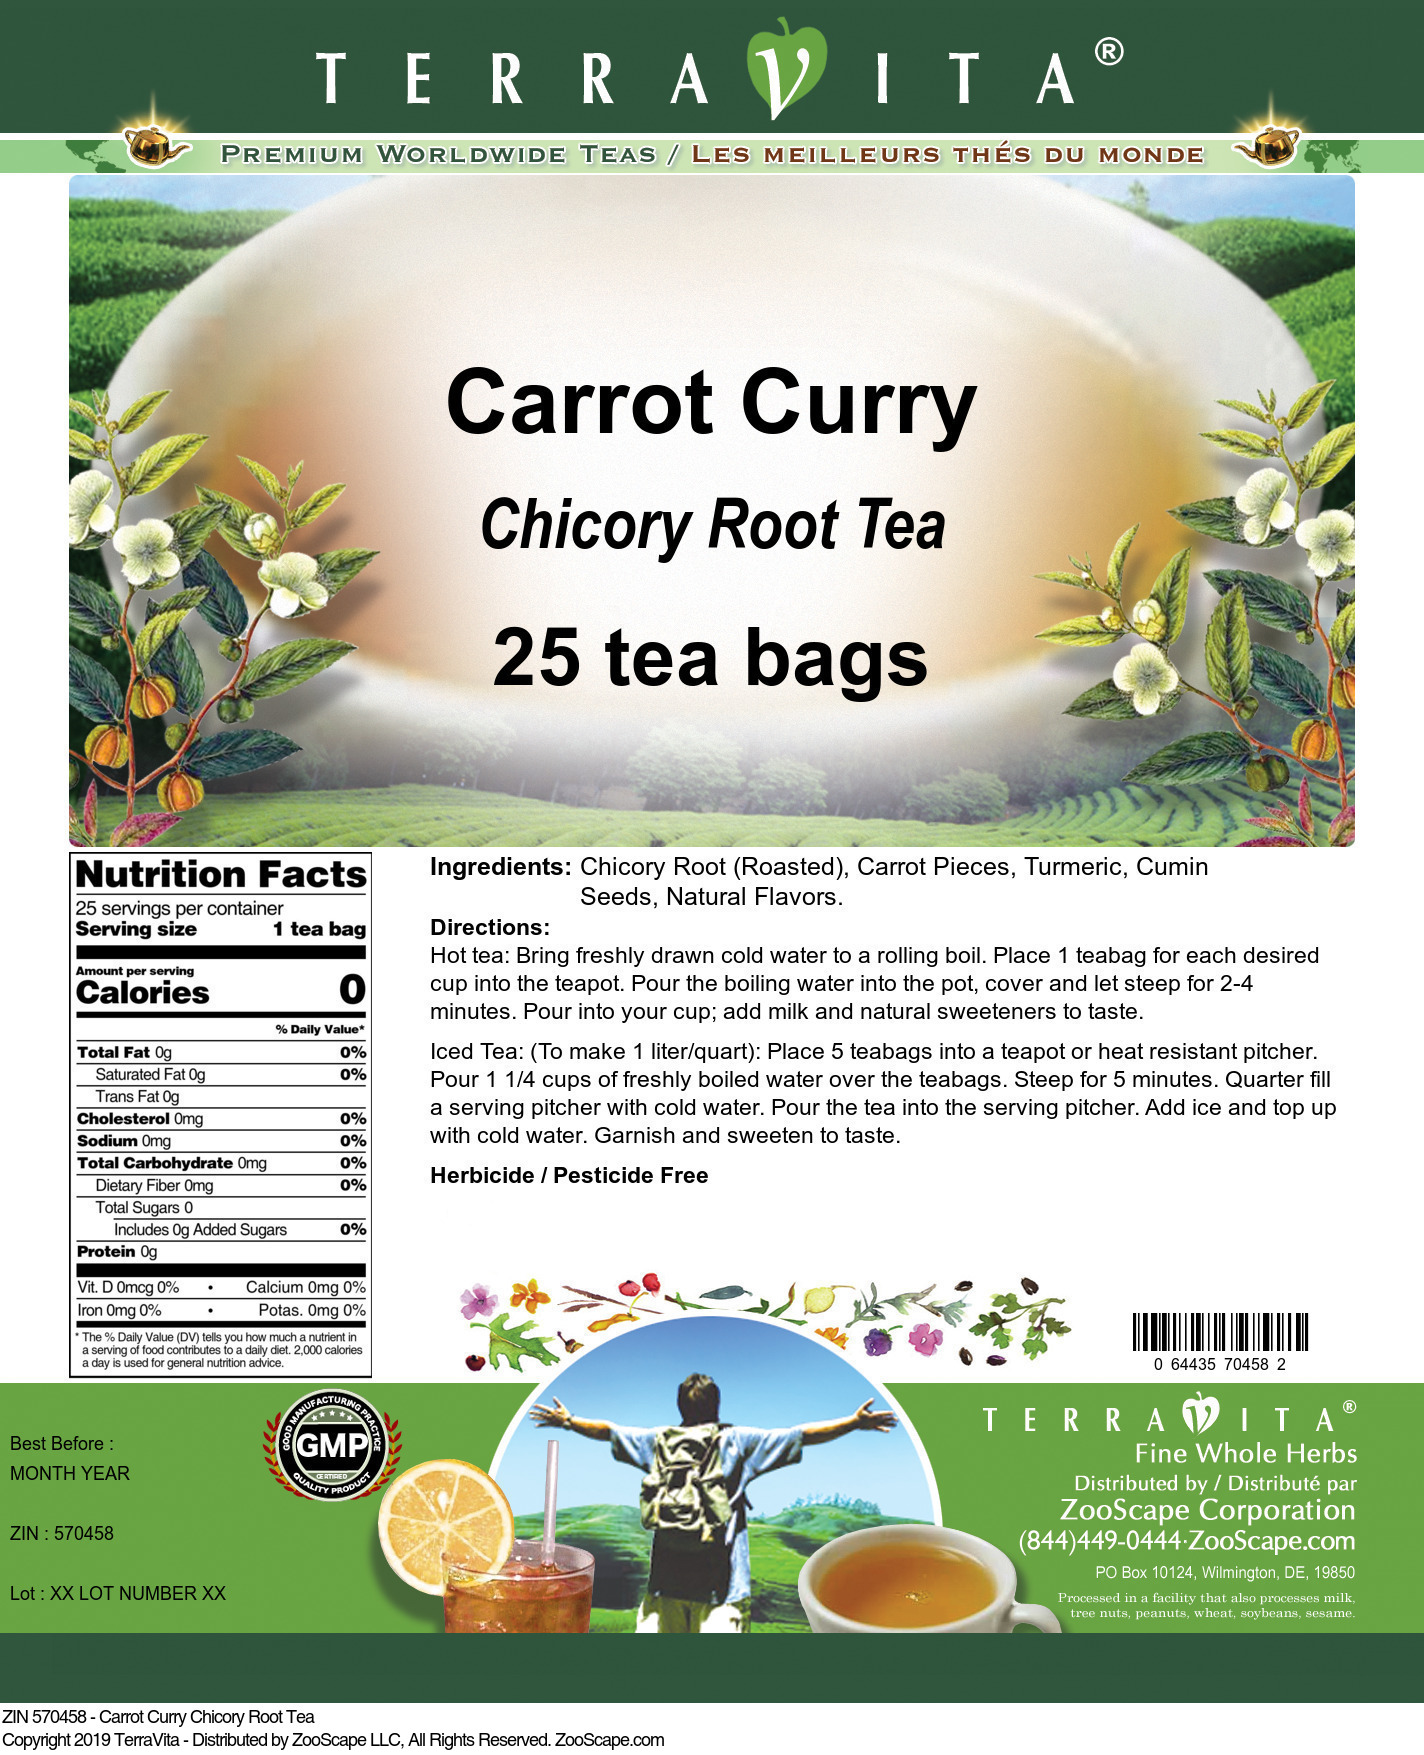 Carrot Curry Chicory Root Tea - Label